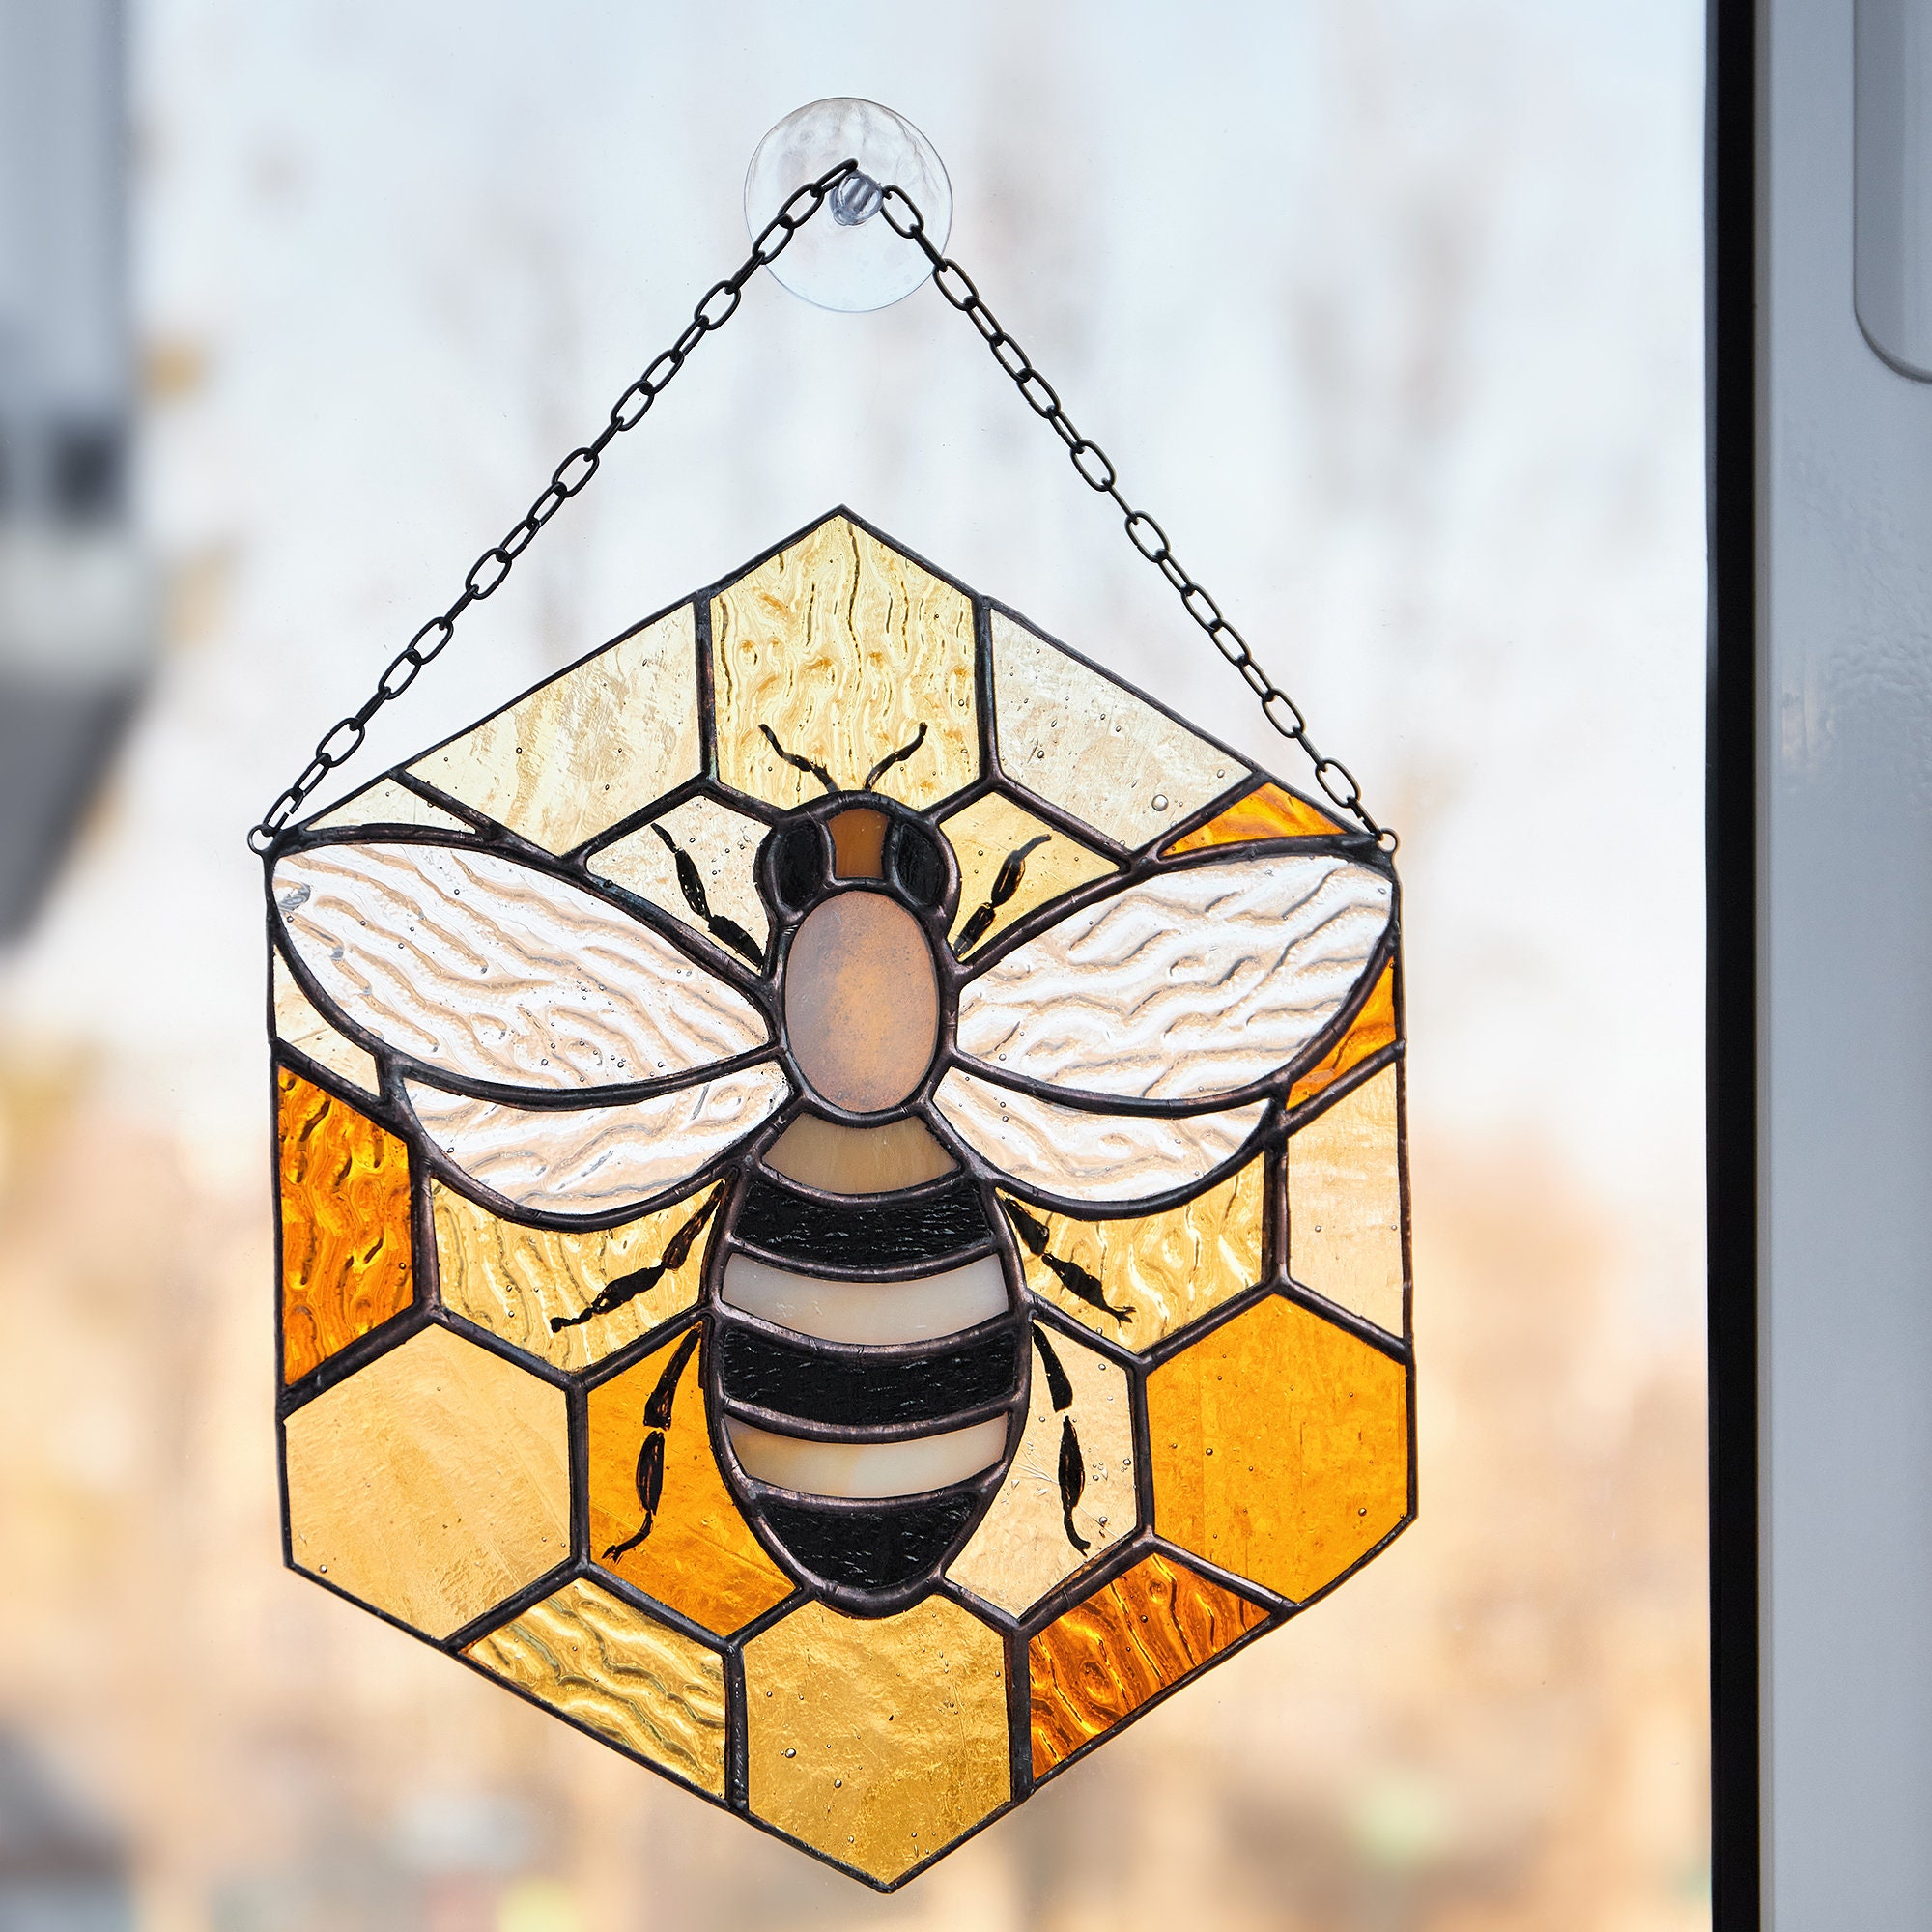 HAOSUM Bee Suncatcher Flower Stained Glass Window Hangings, Bee Decor Party Birthday Gifts for Women ,Bee lovers, Housewarming Gifts.